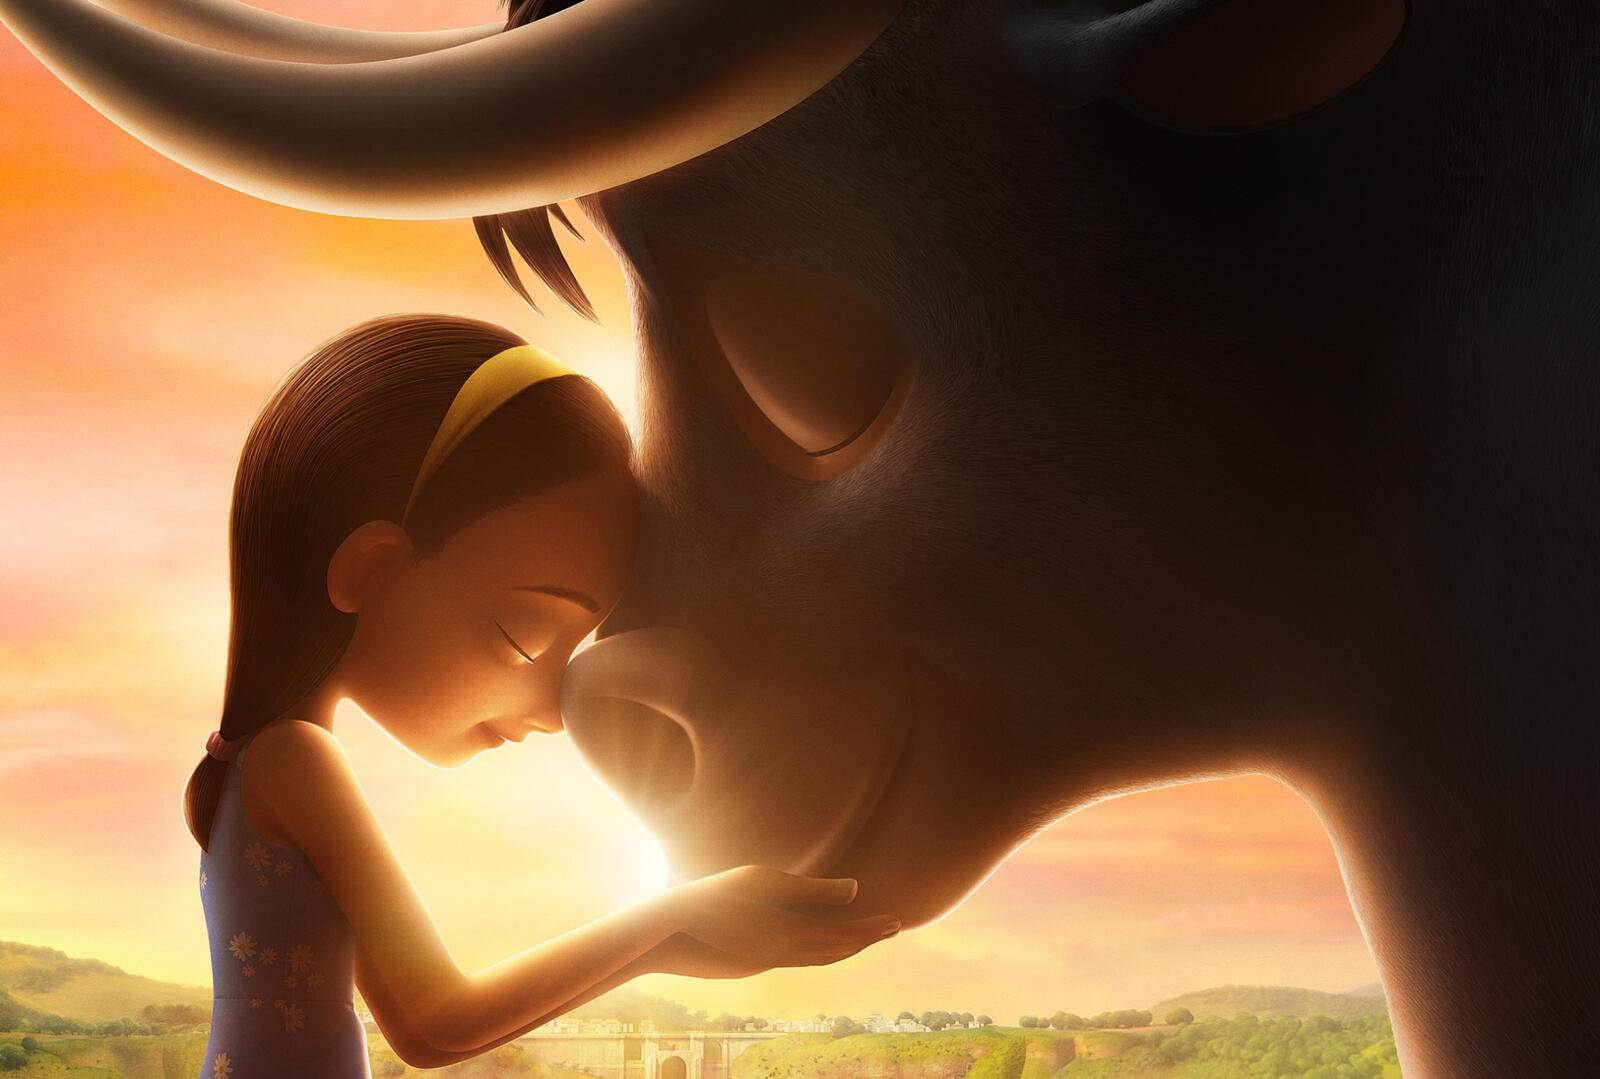 Wallpapers Ferdinand animated movies 2017 Movies on the desktop